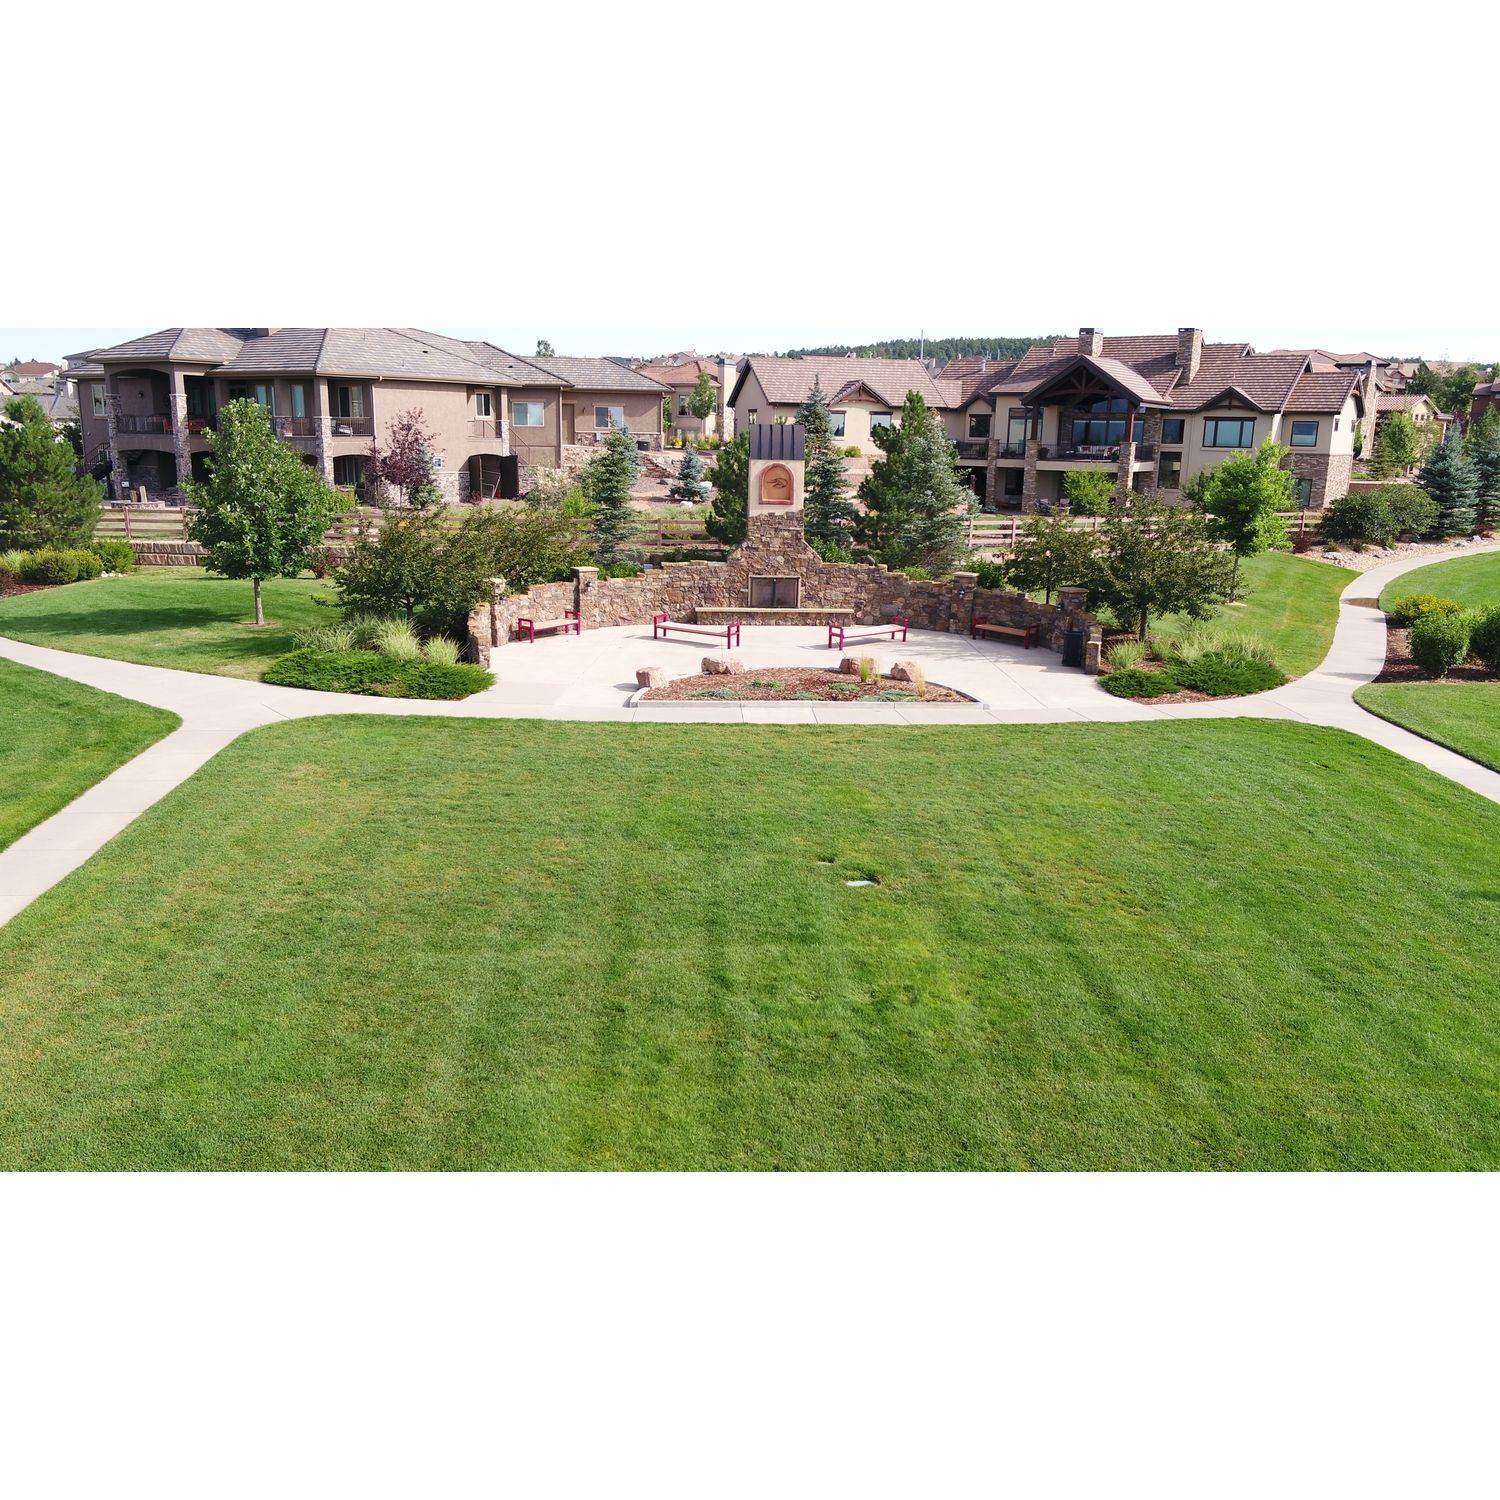 8. Flying Horse κτίριο σε 2409 Parma Court, Colorado Springs, CO 80921